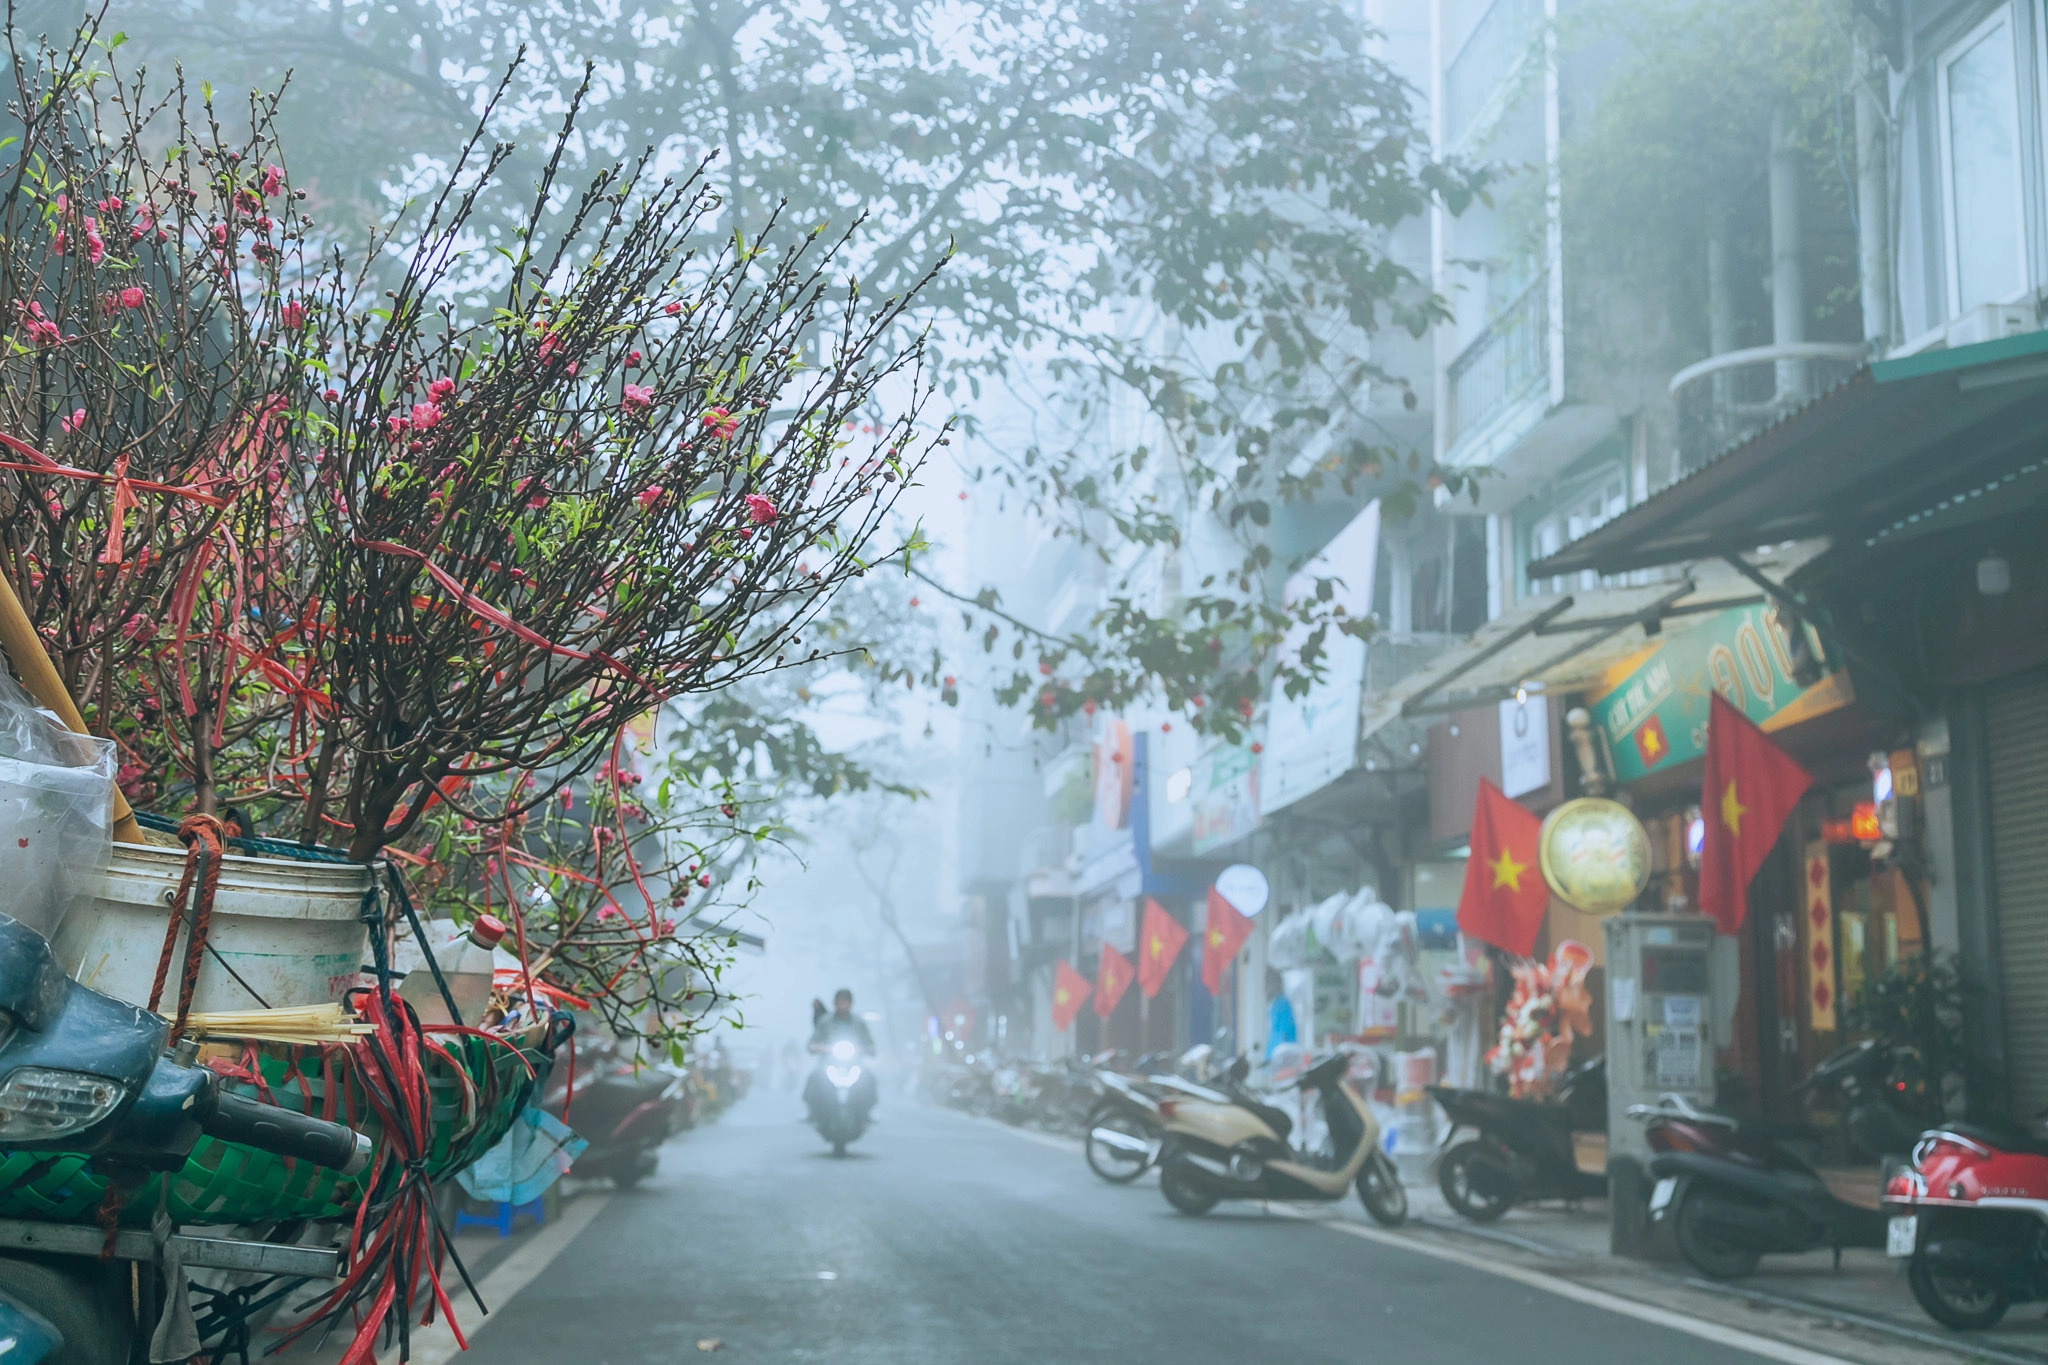 Tet atmosphere in Hanoi captured by Lee Hyo-seung